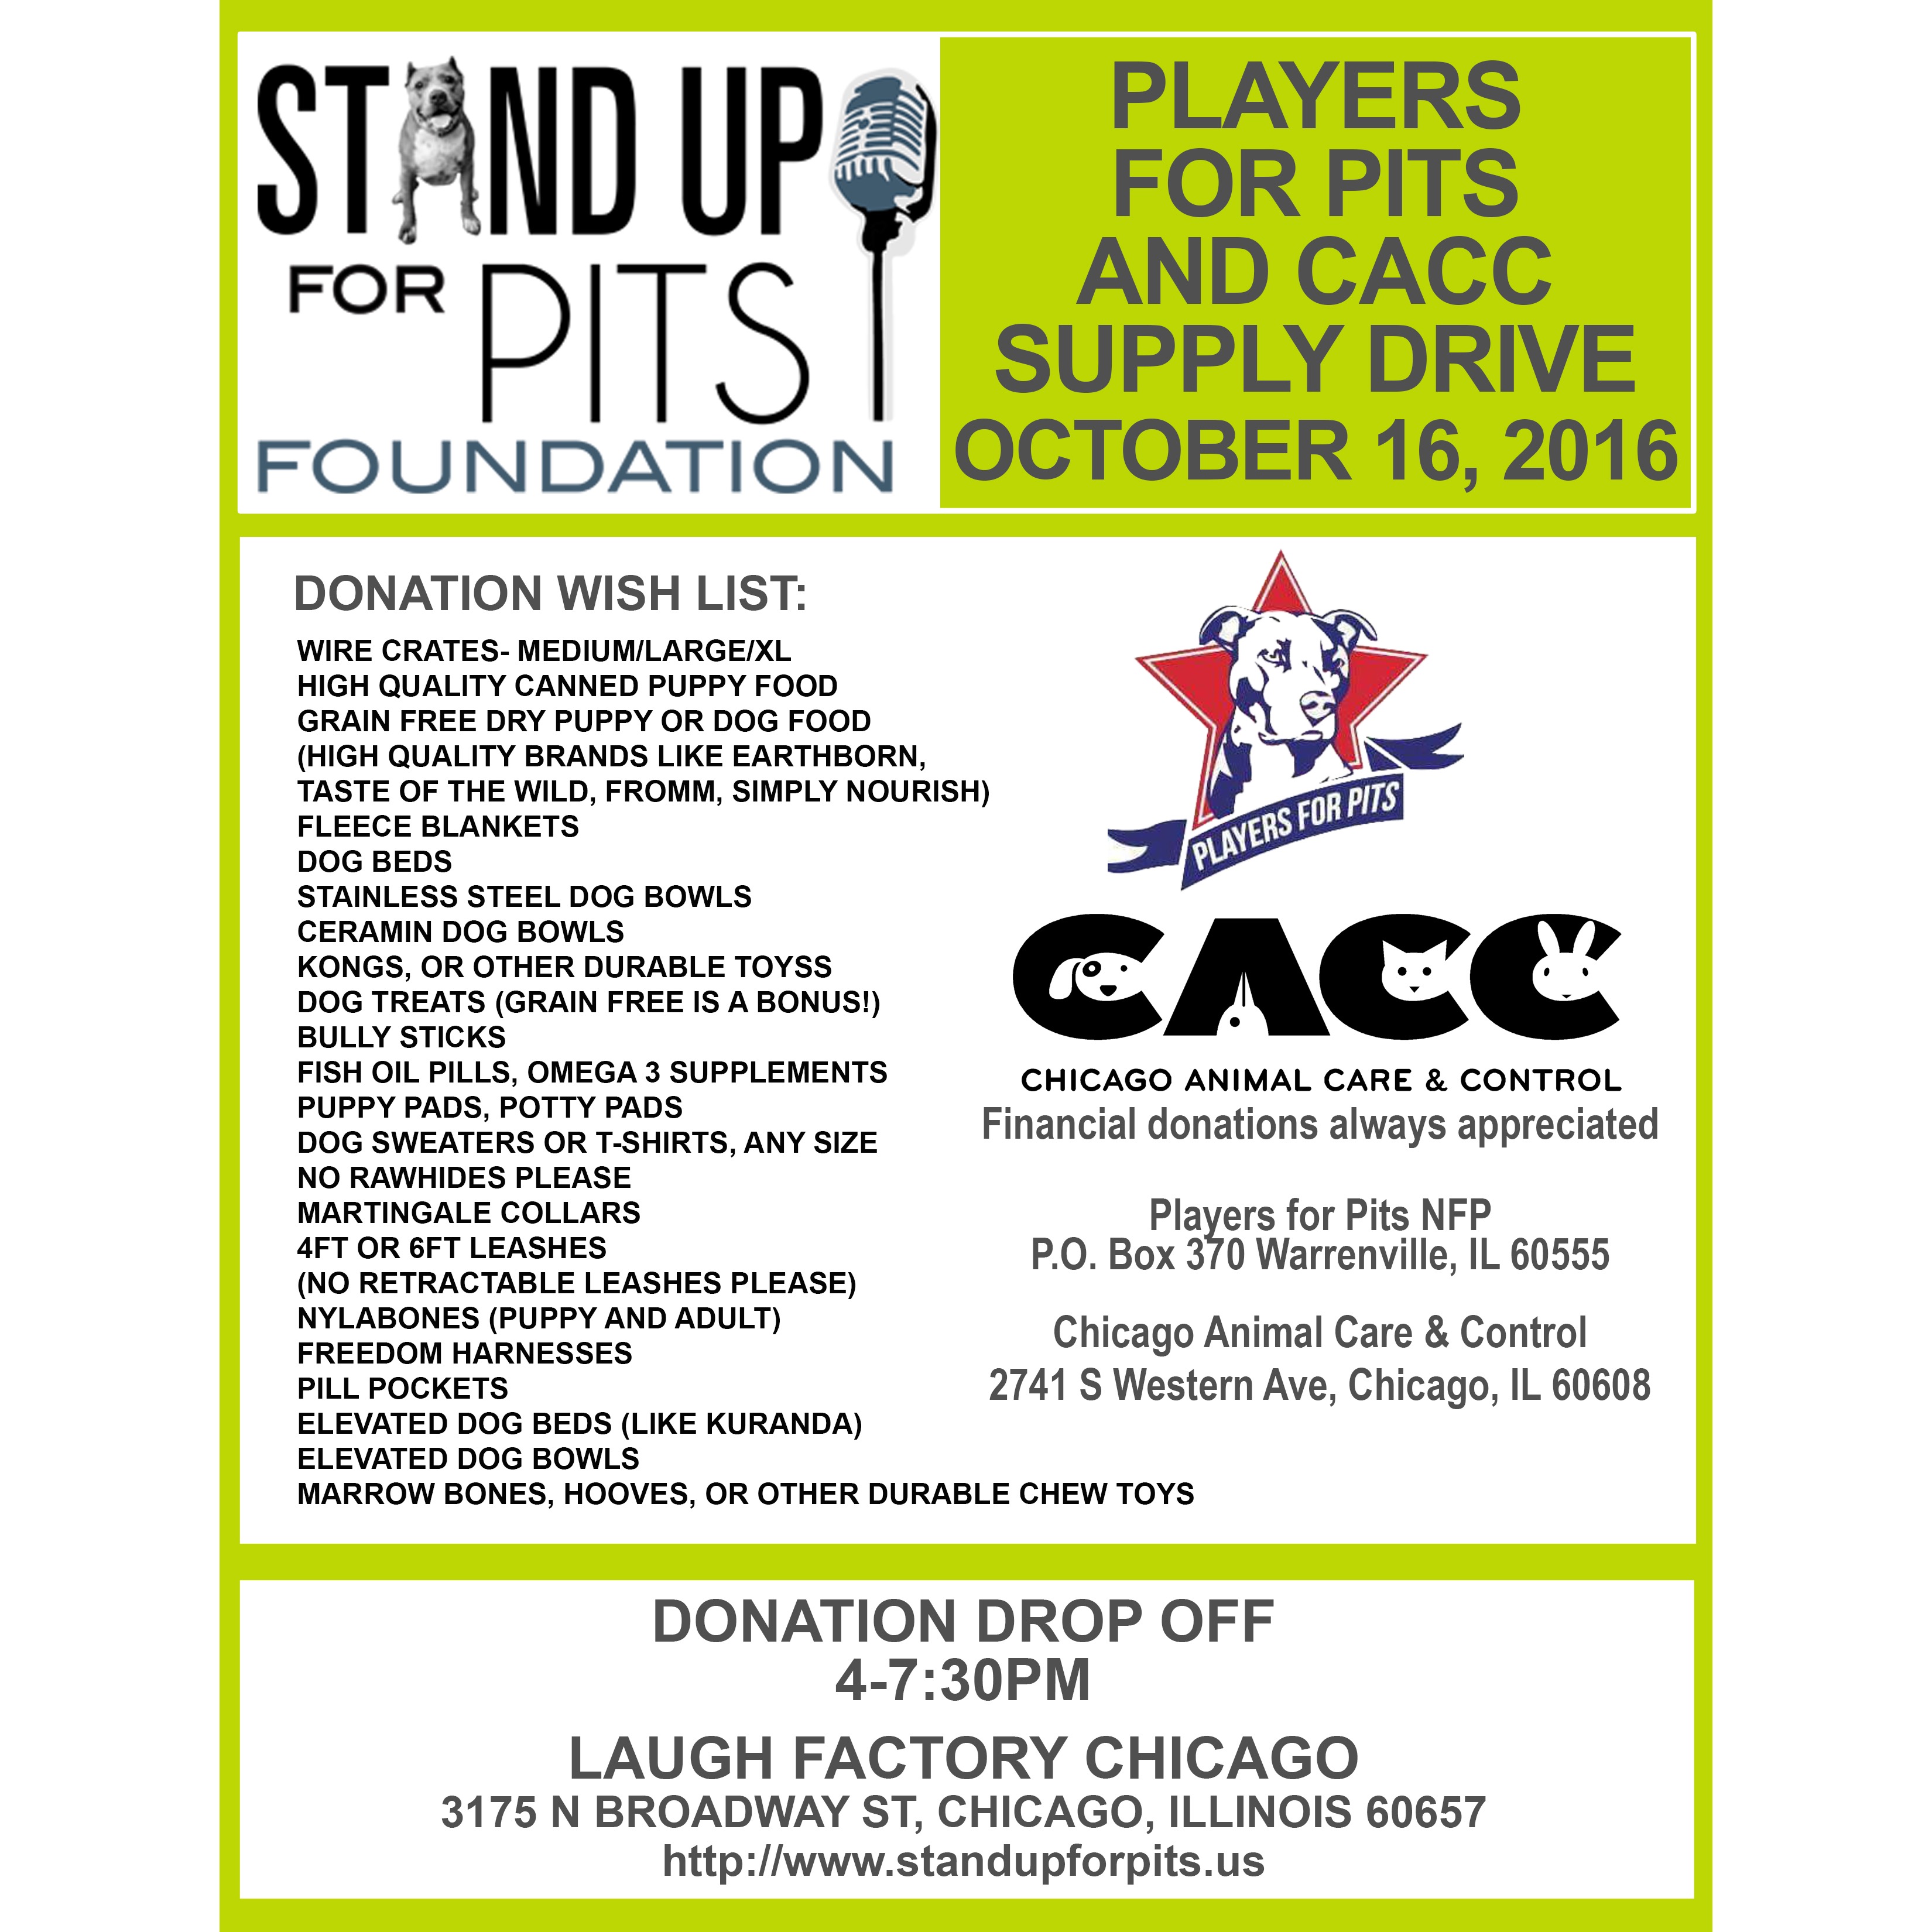 SUFP Foundation Donation Drive is coming to CHICAGO!